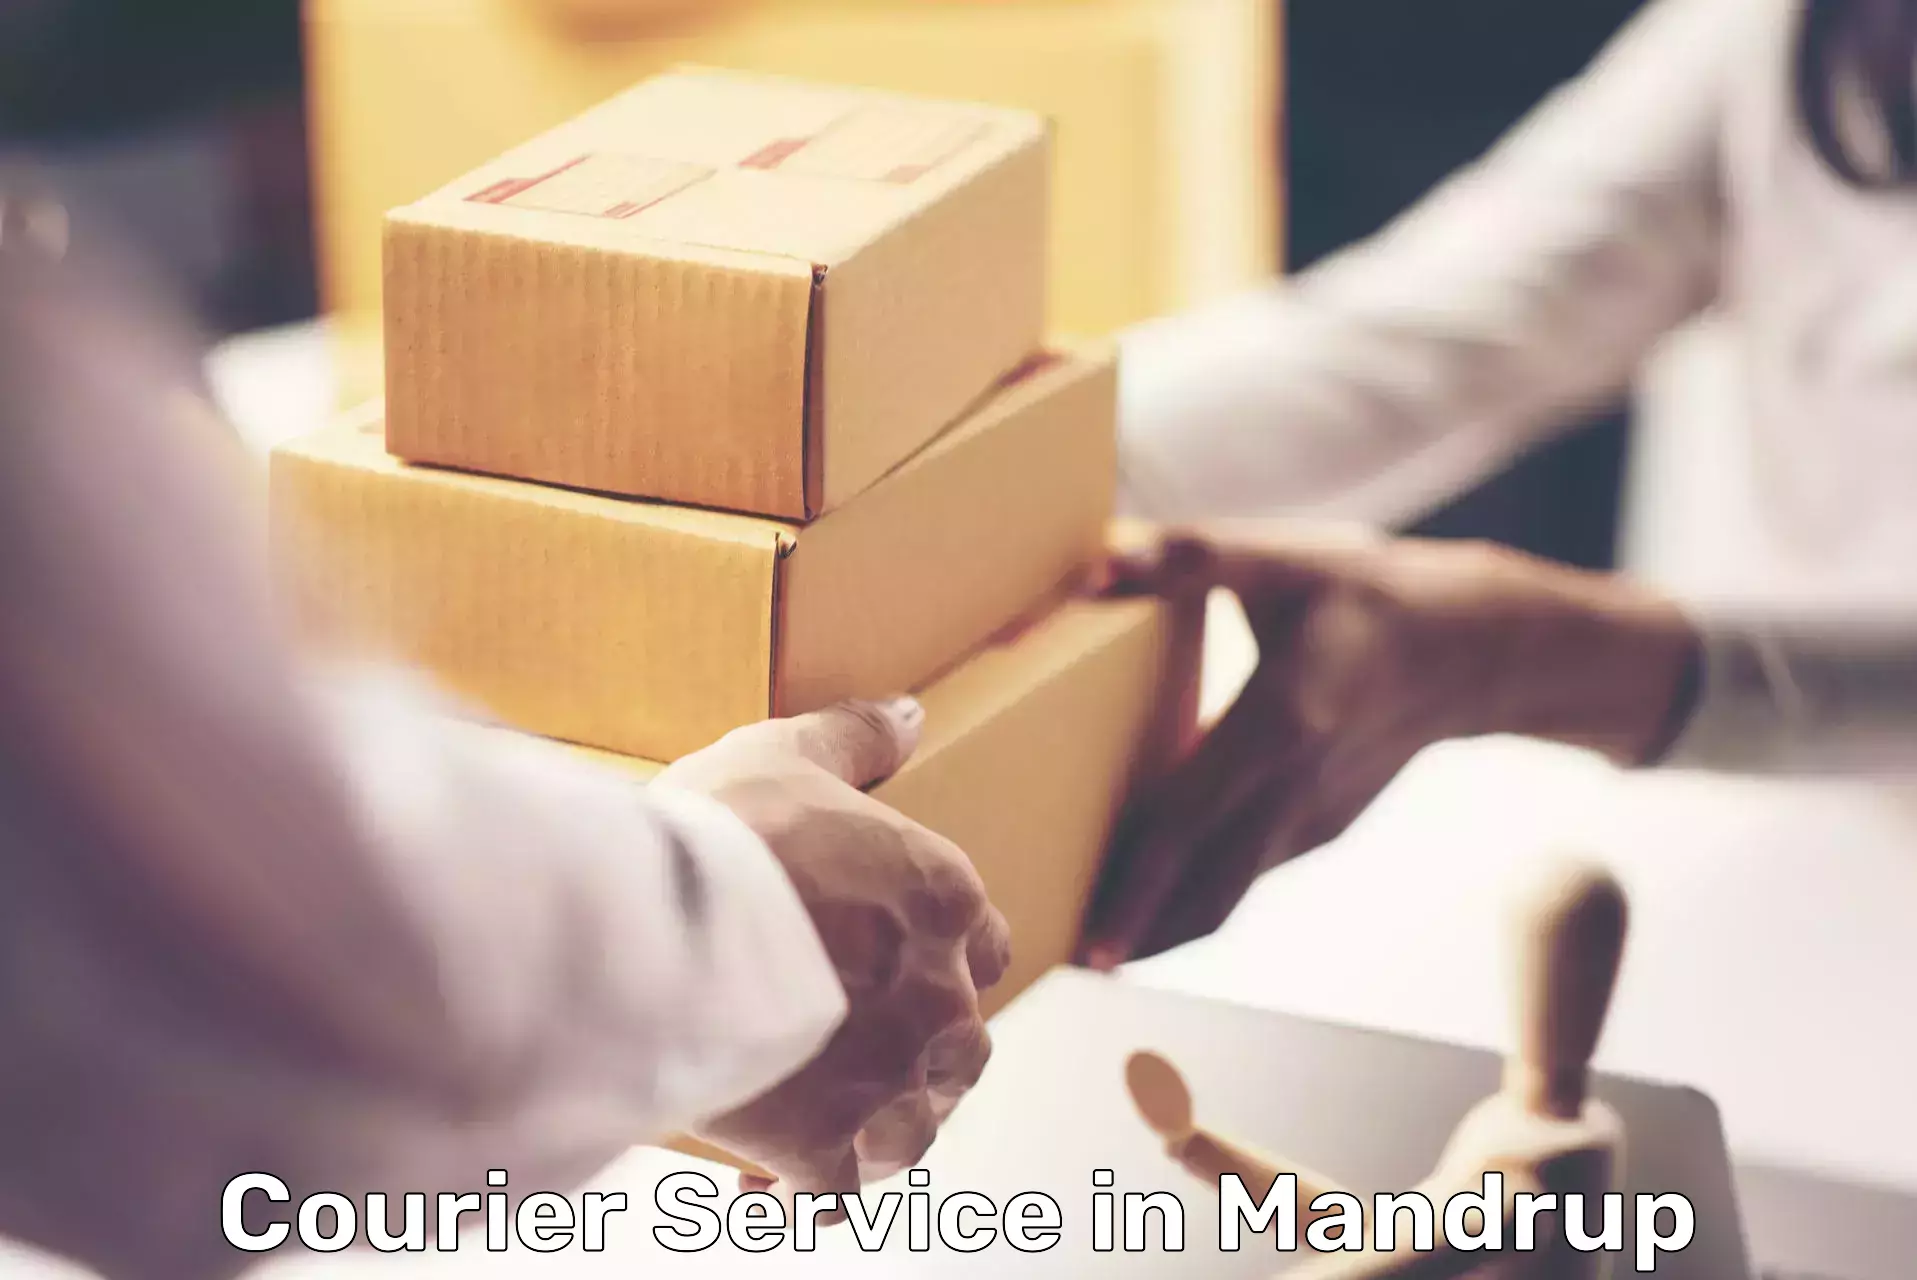 Same-day delivery solutions in Mandrup